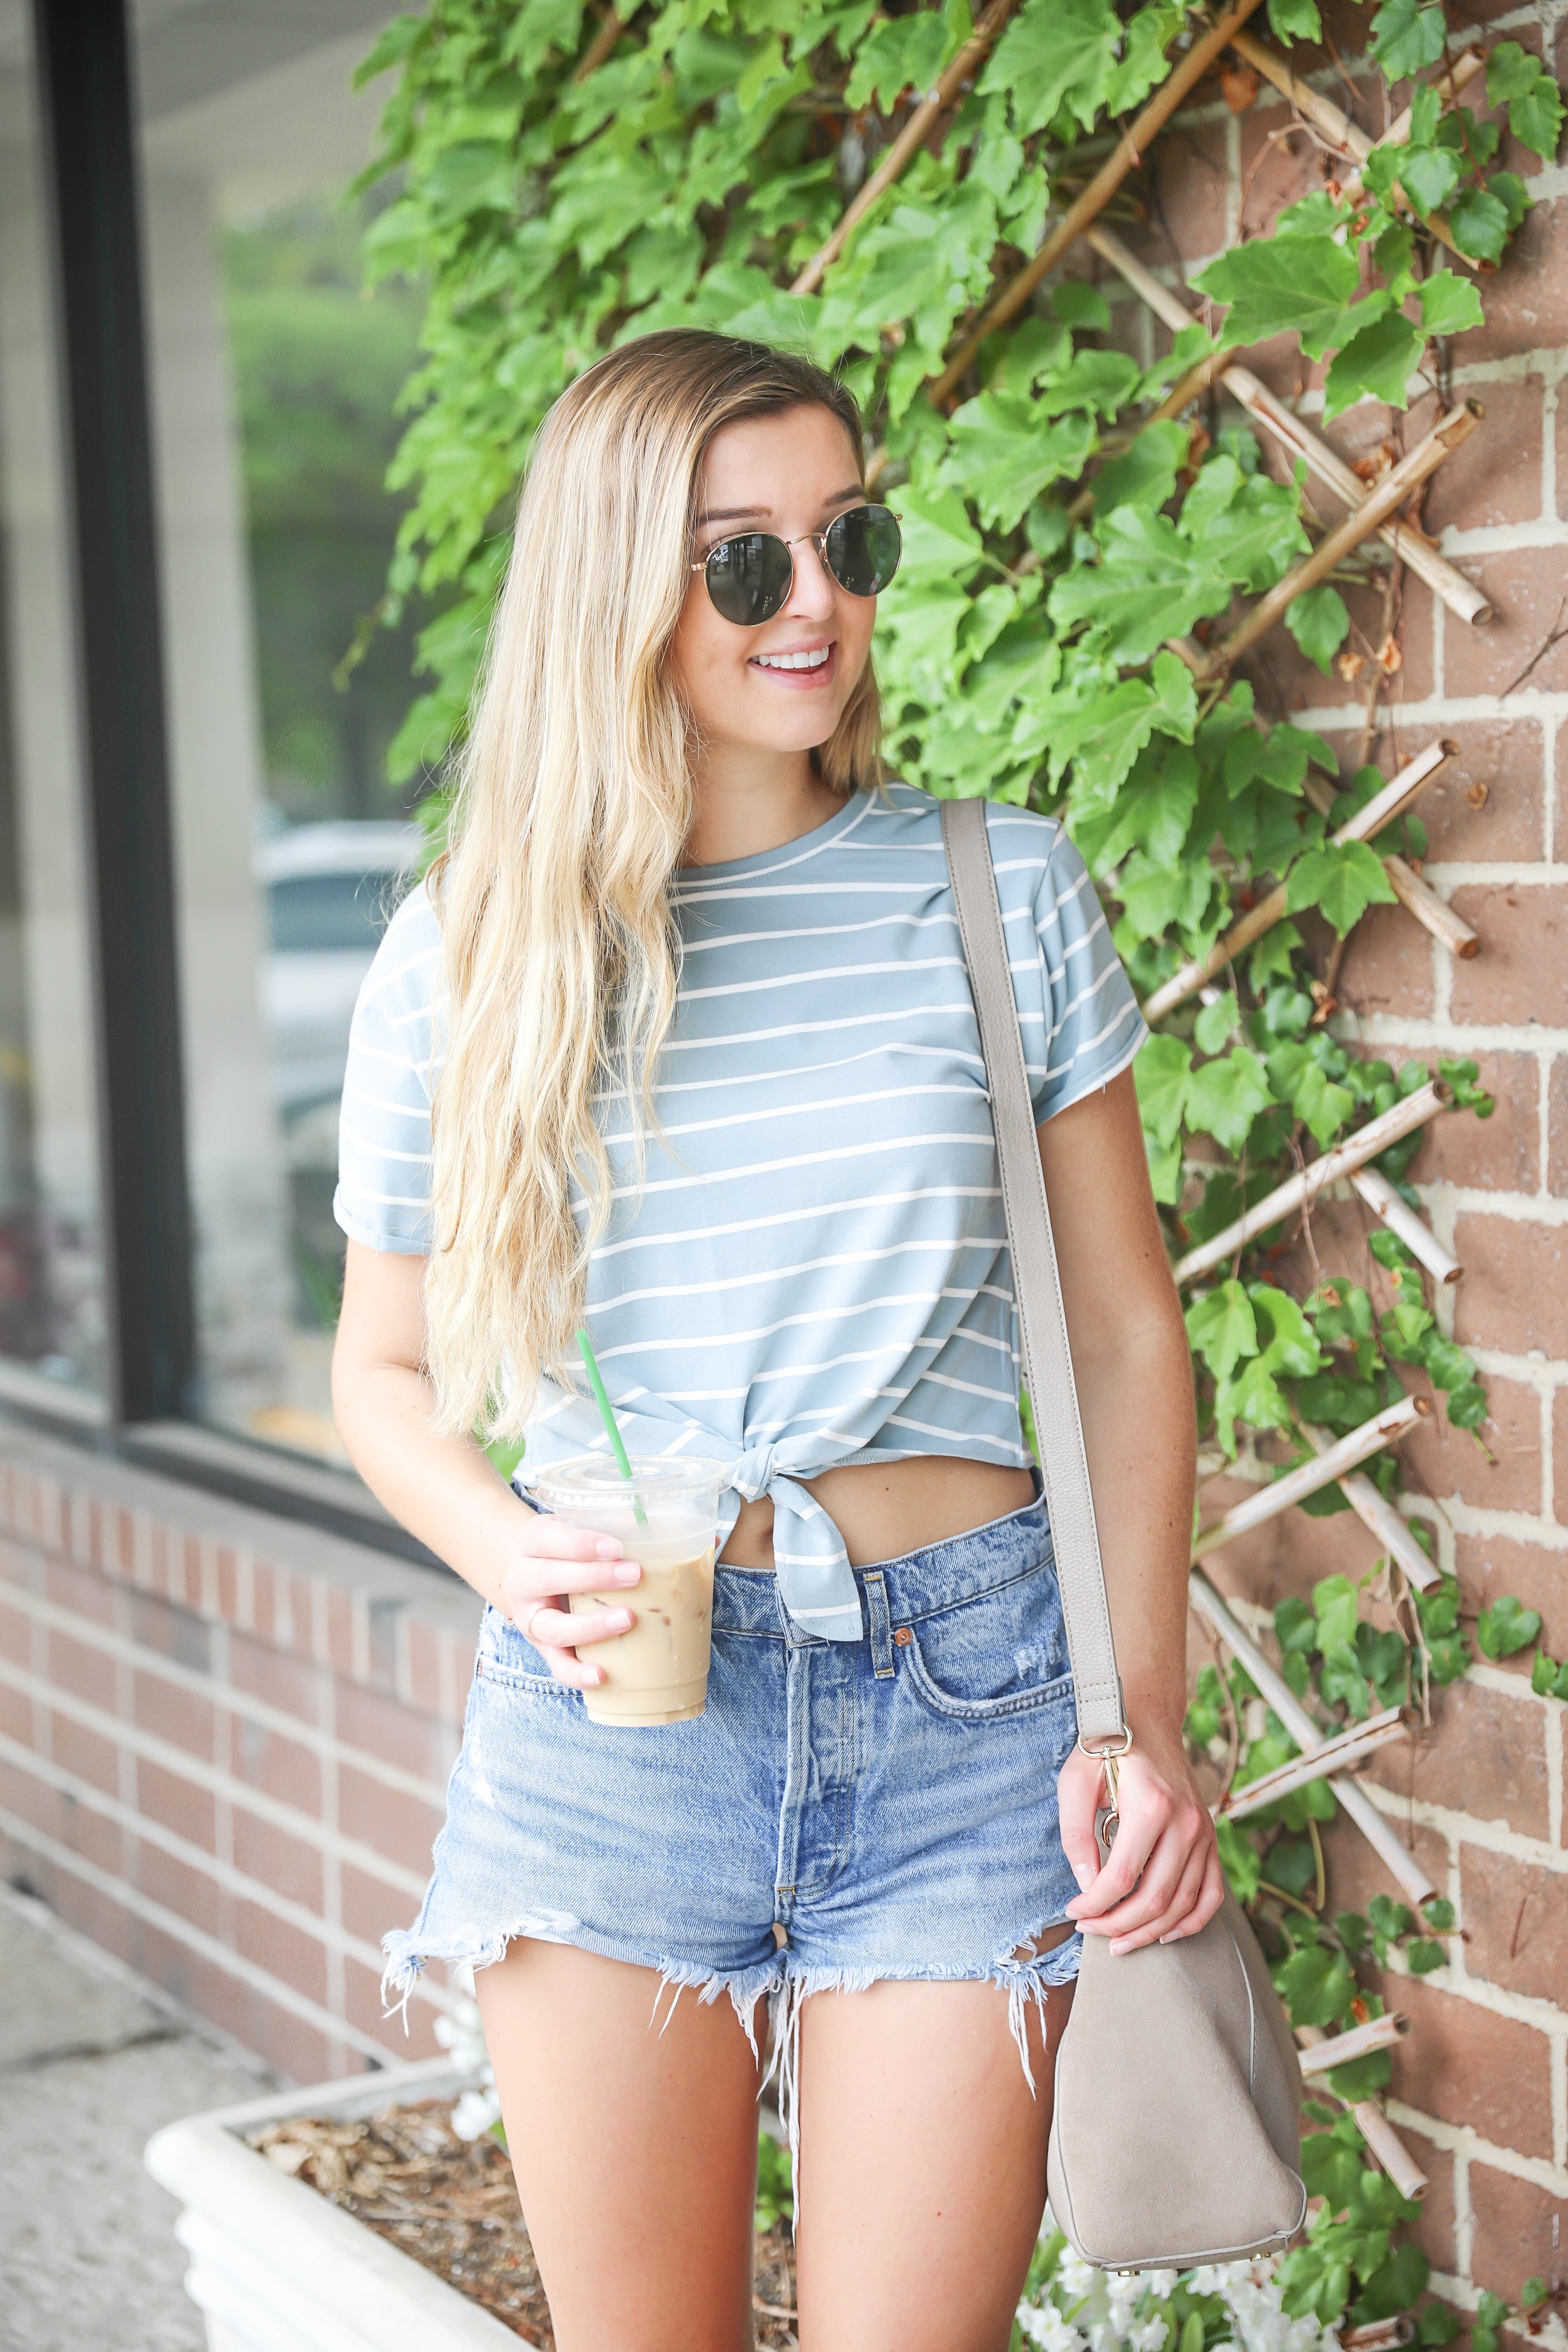 https://dailydoseofcharm.com/wp-content/uploads/2018/08/Back-to-school-clothing-under-30-from-Amazon-fashion-fall-clothing-outfits-haul-on-daily-dose-of-charm-lauren-lindmark-4P6A9729.jpg